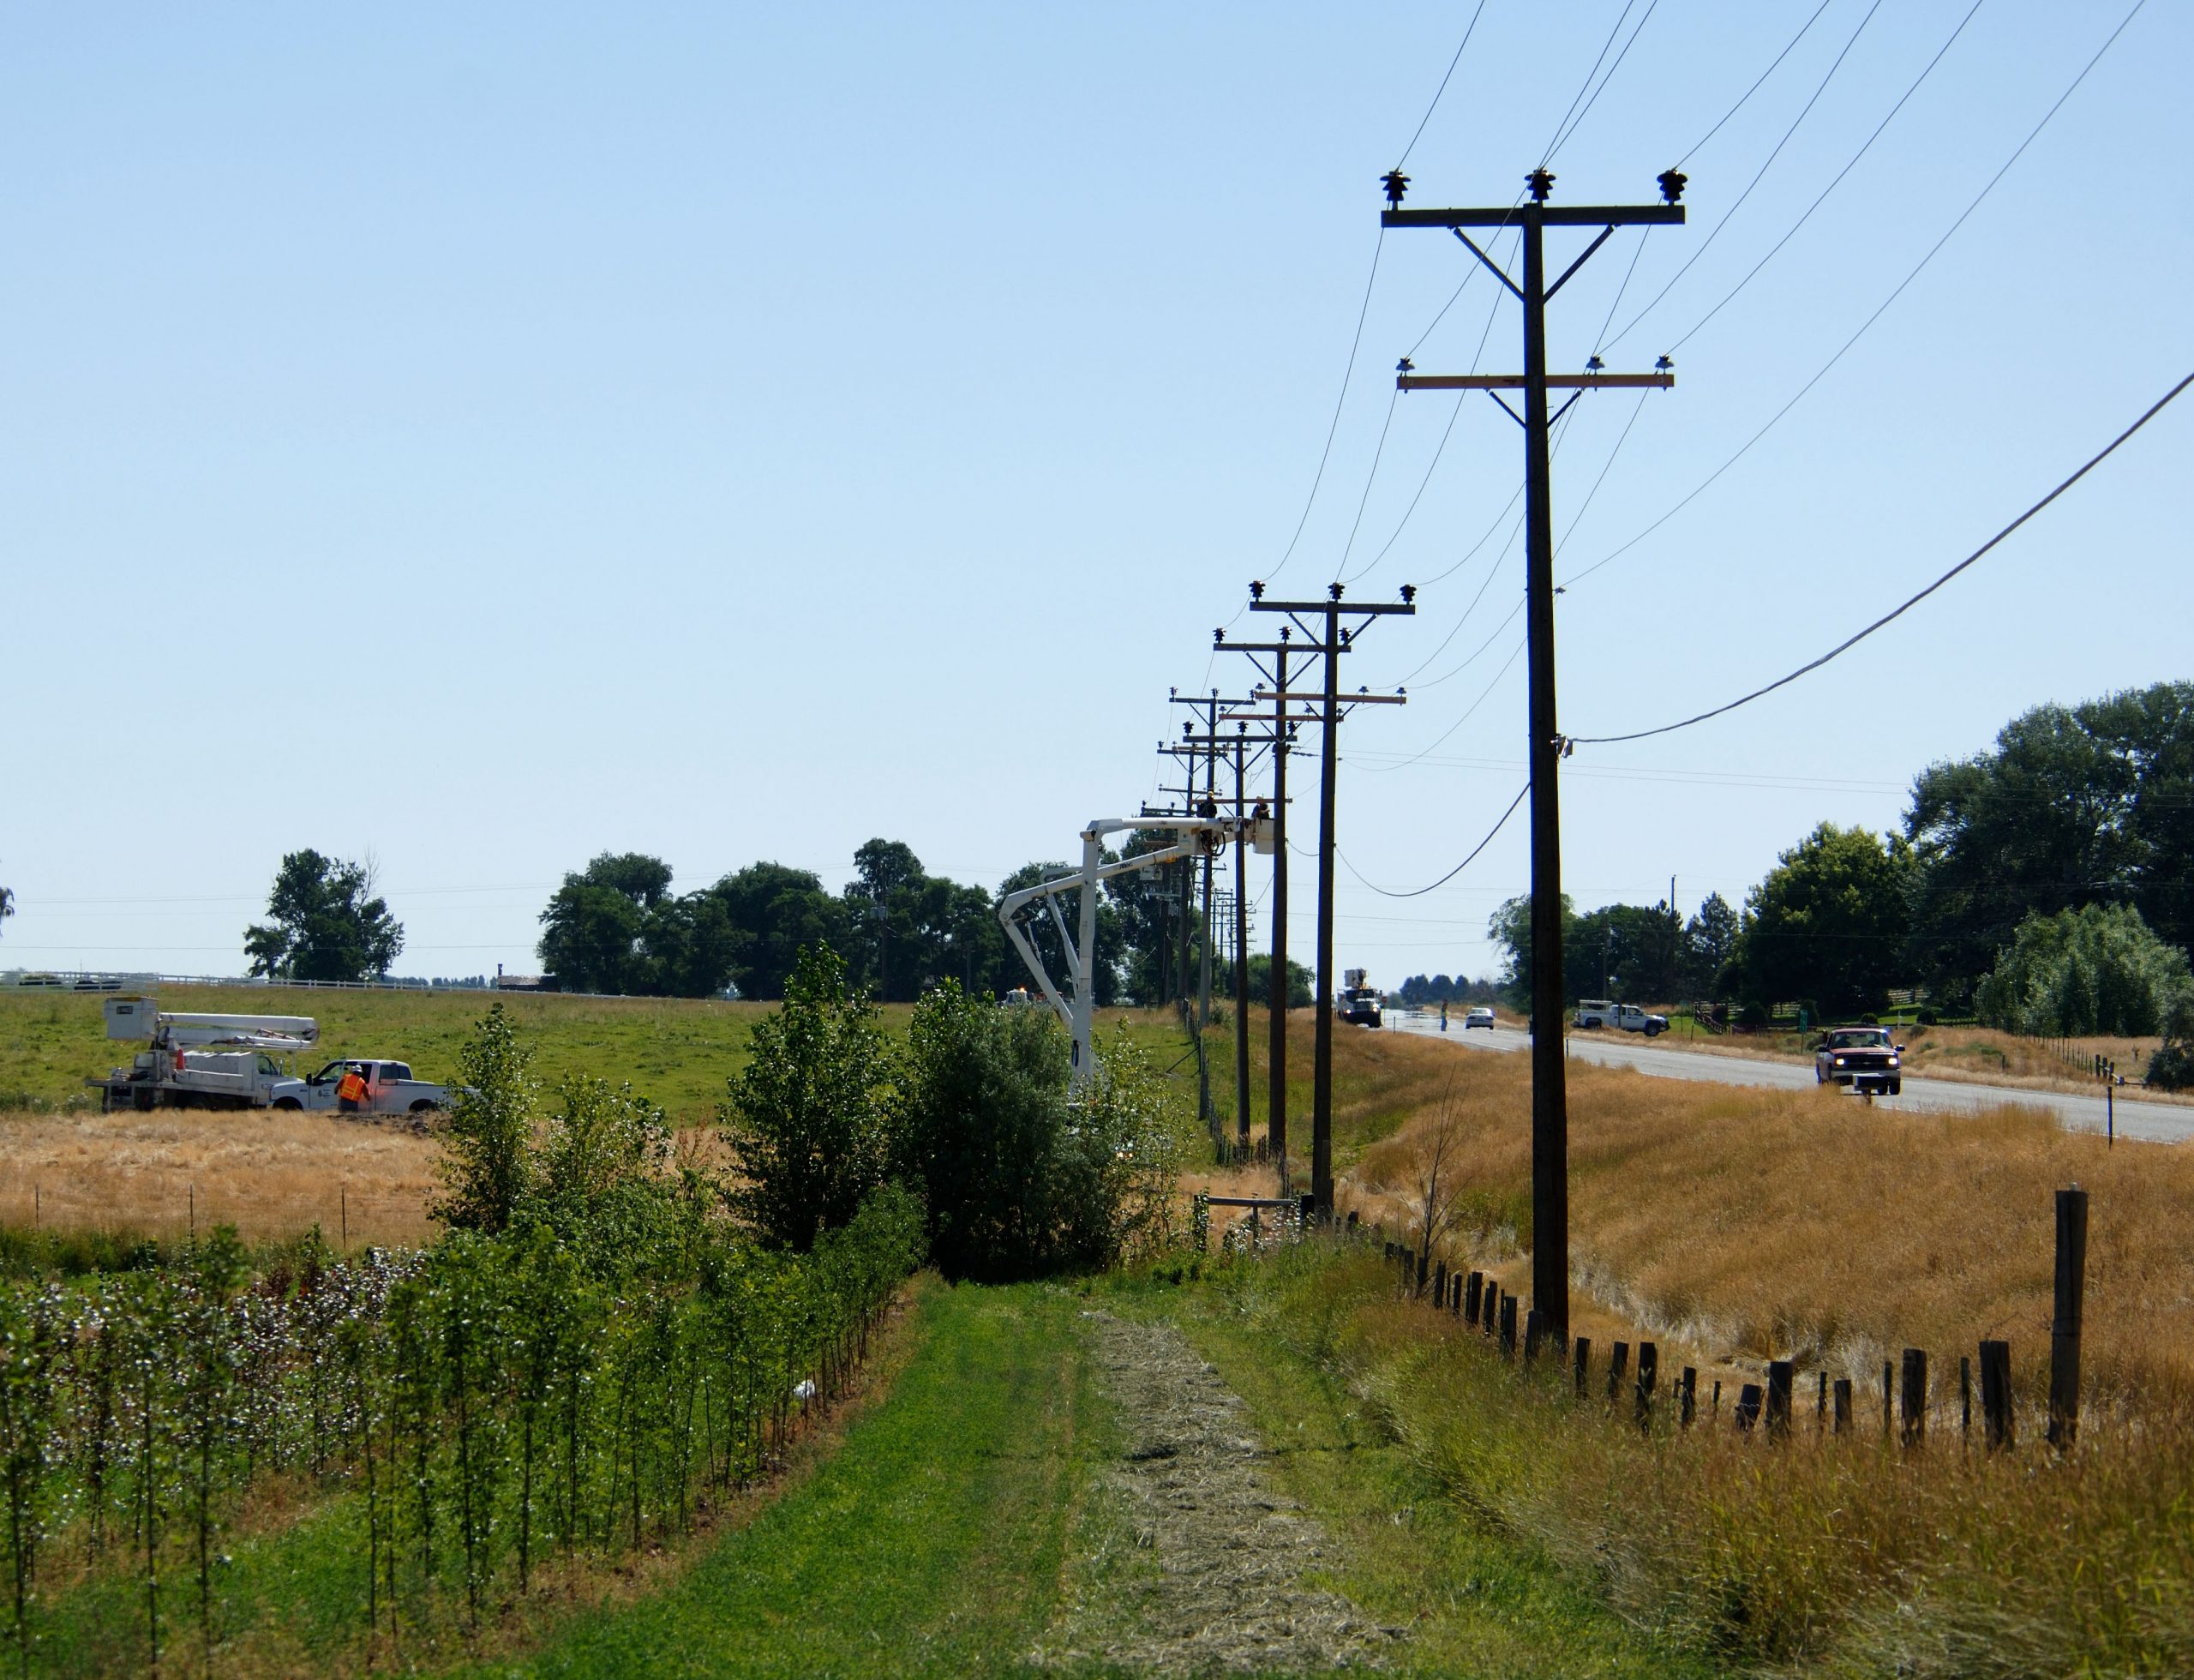 Lineman working on power lines in a rural area